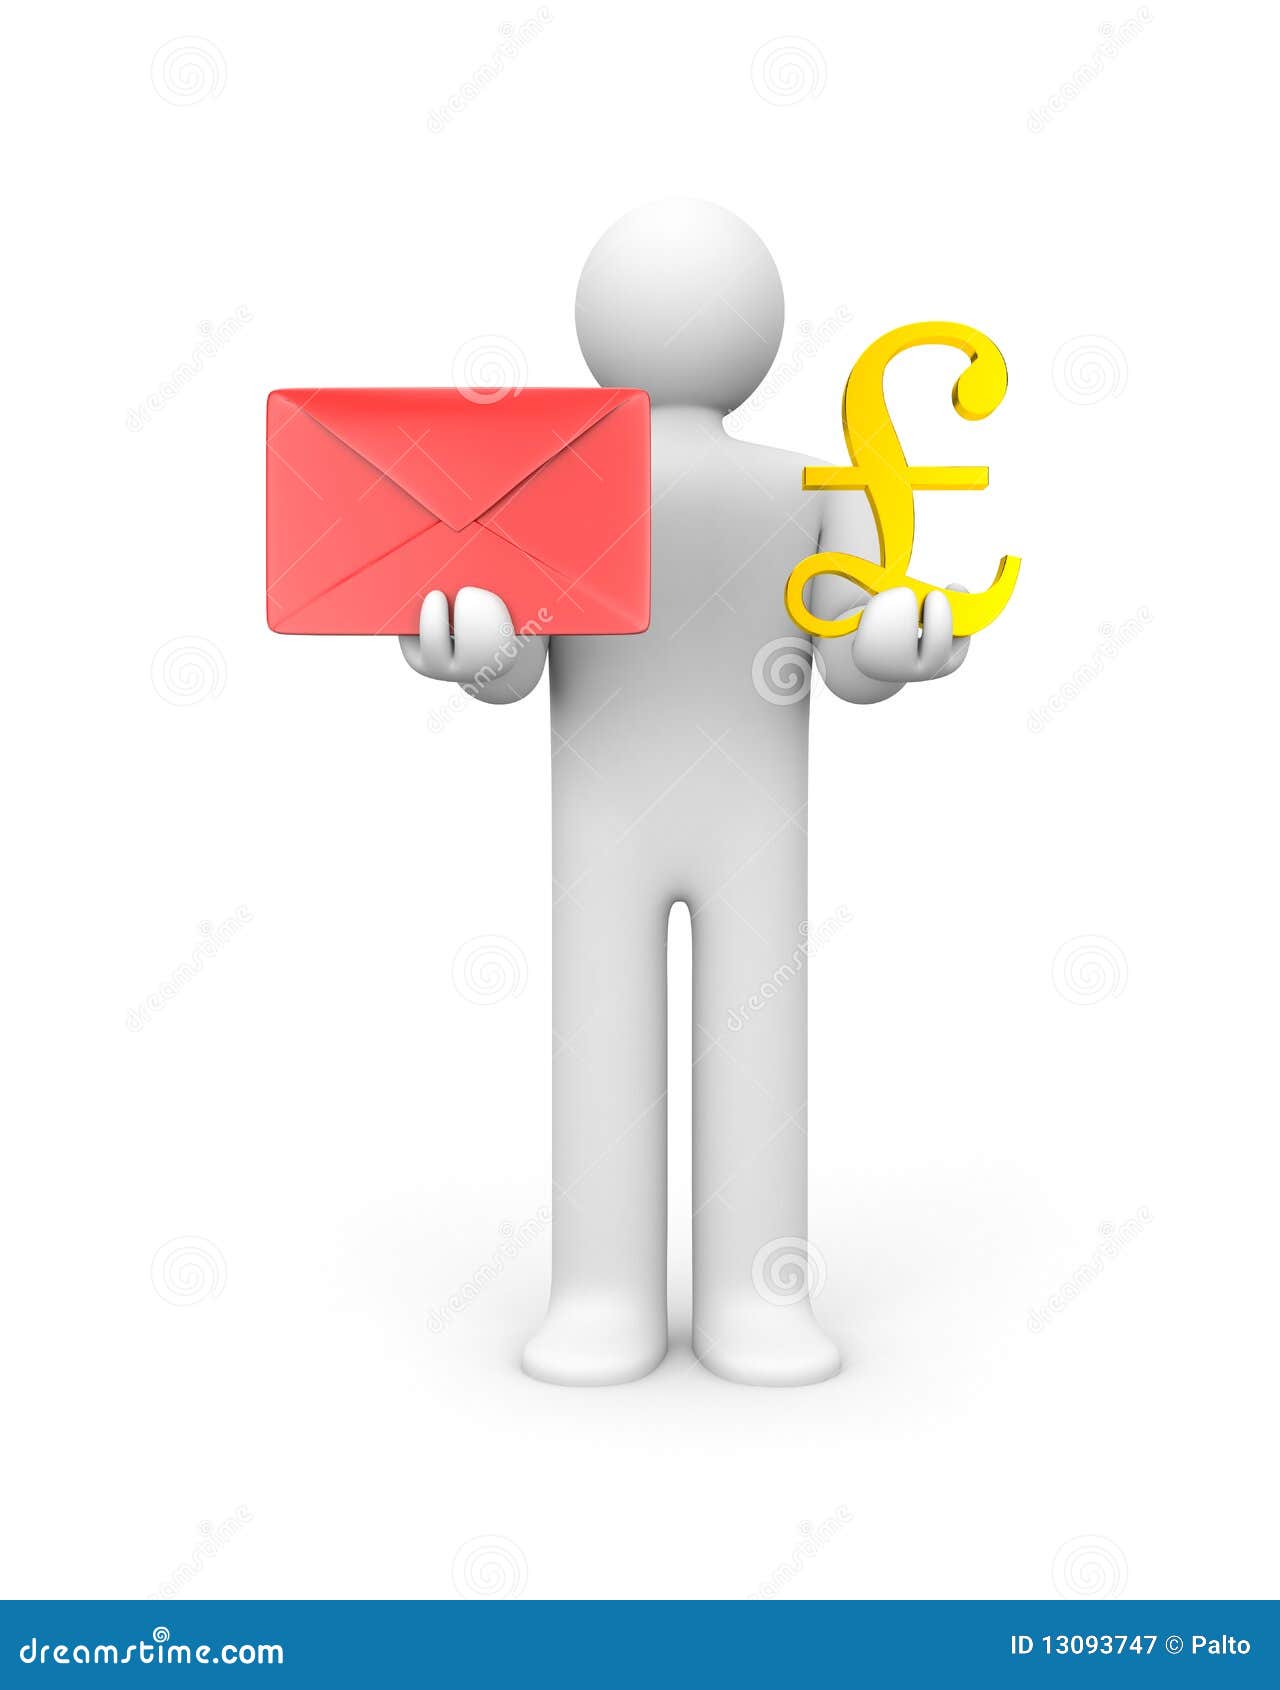 Monetize You Mail Royalty Free Stock Photography - Image: 13093747